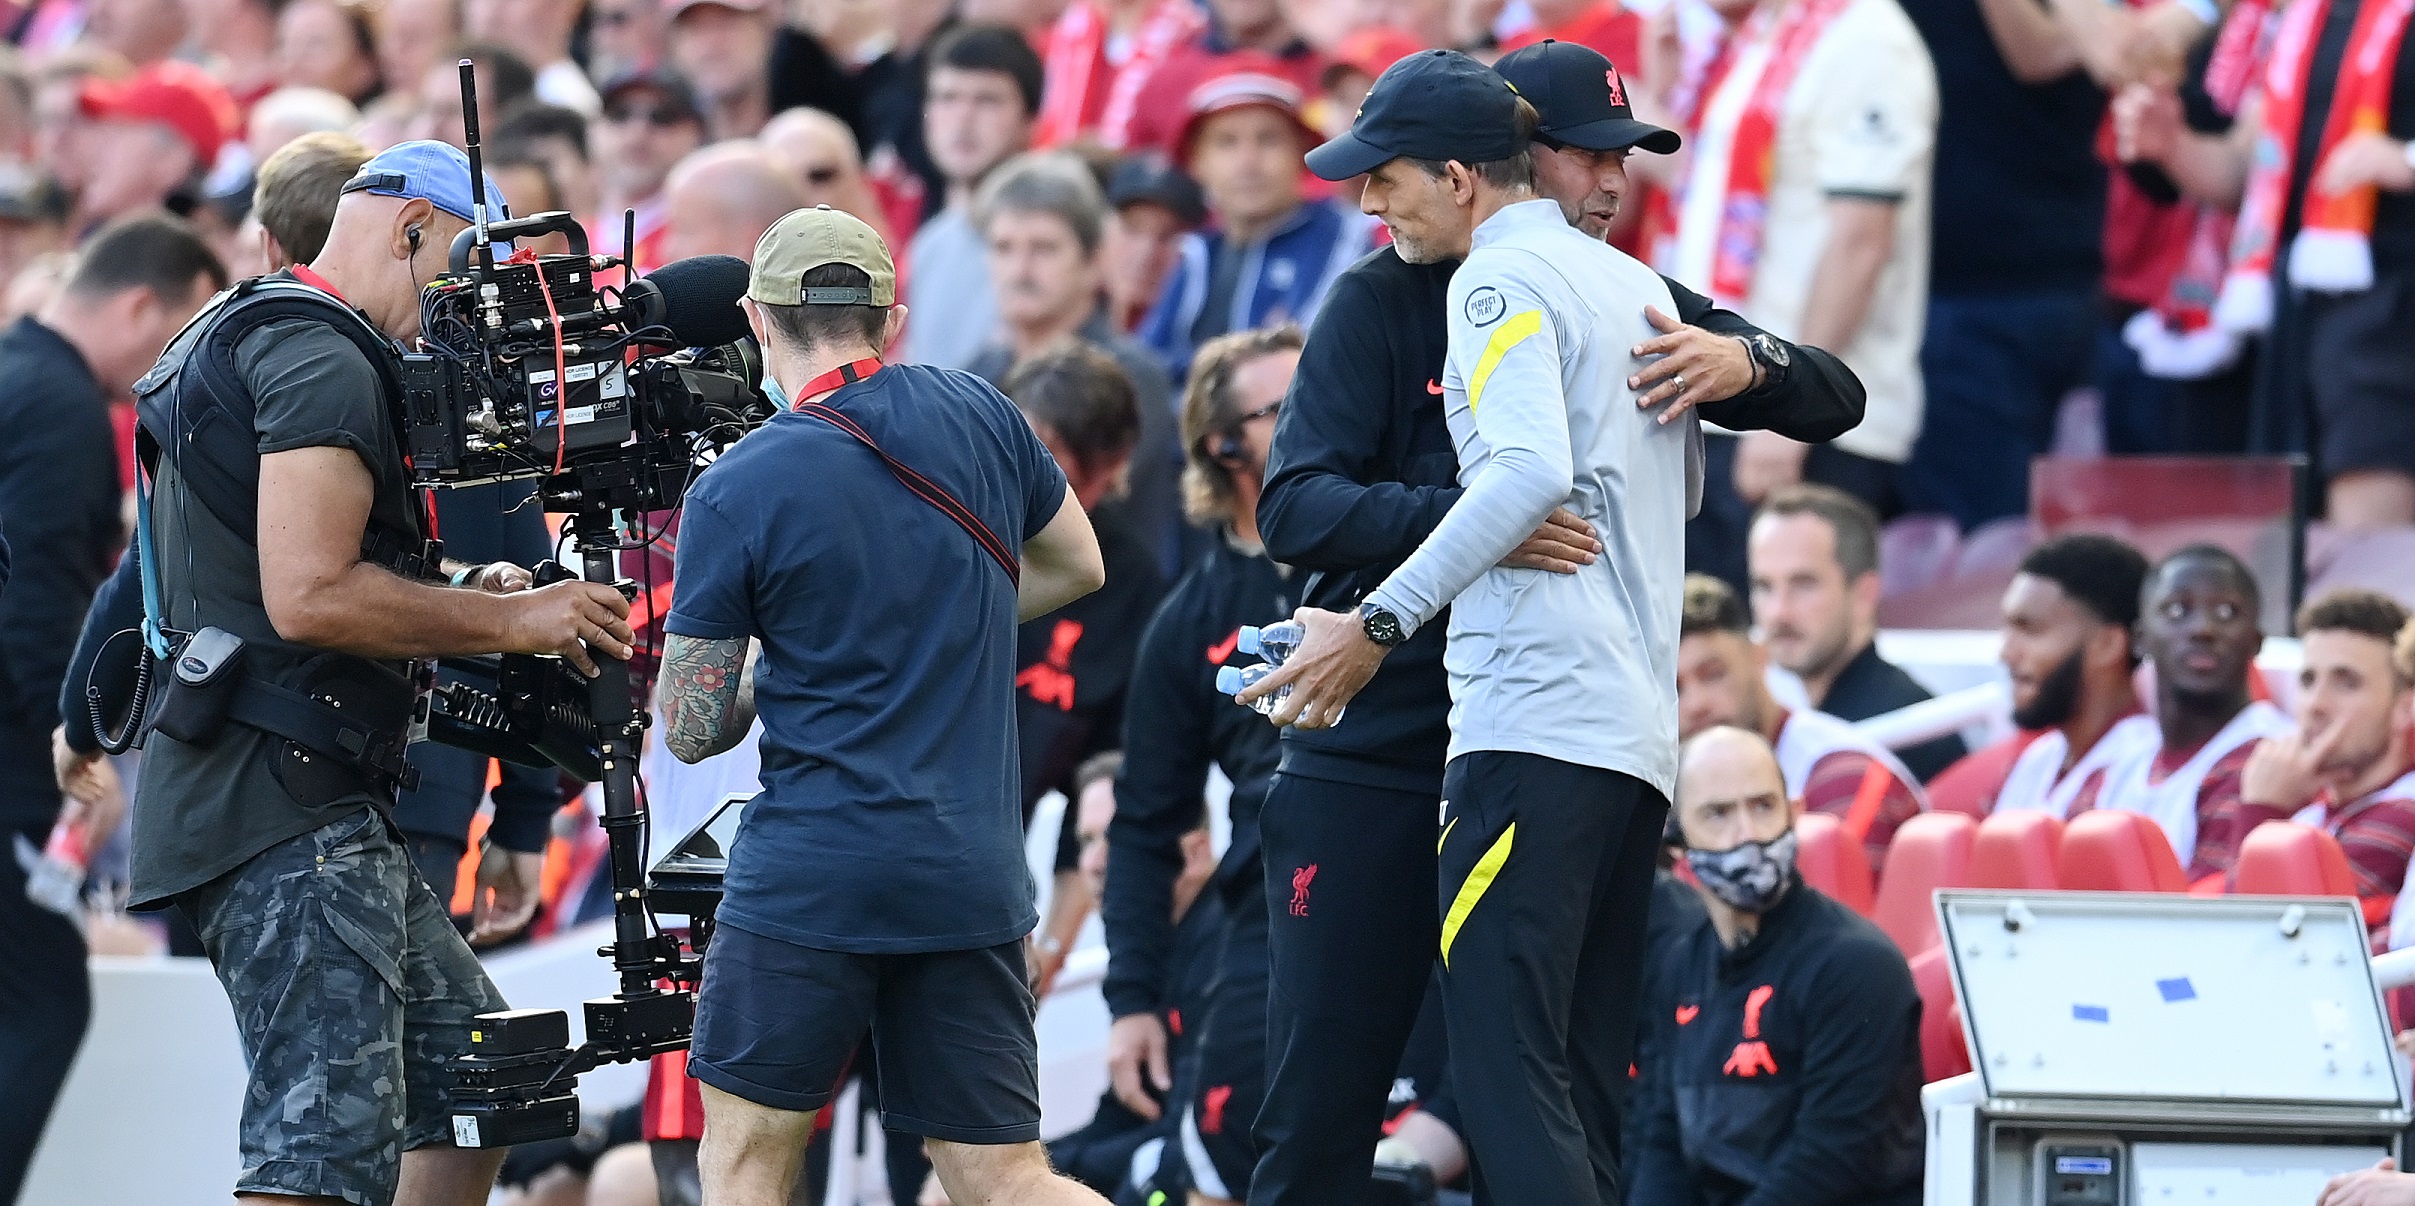 Thomas Tuchel previews next season’s Premier League title race and expects Liverpool to ‘make their squad bigger’